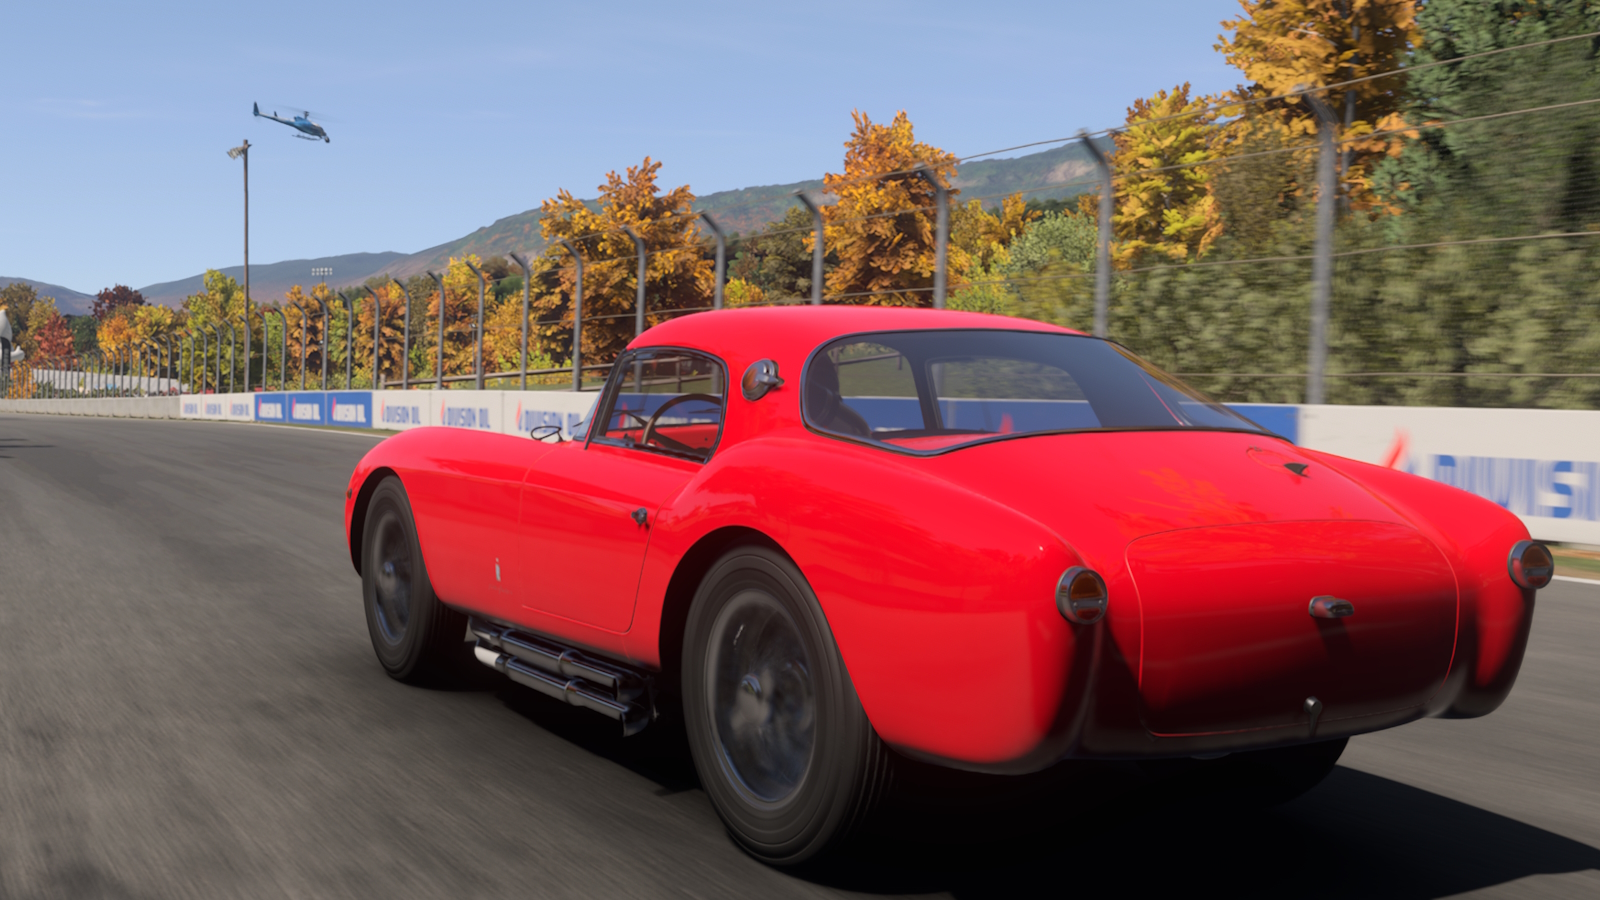 Forza Horizon 1 Graphics For Low PC